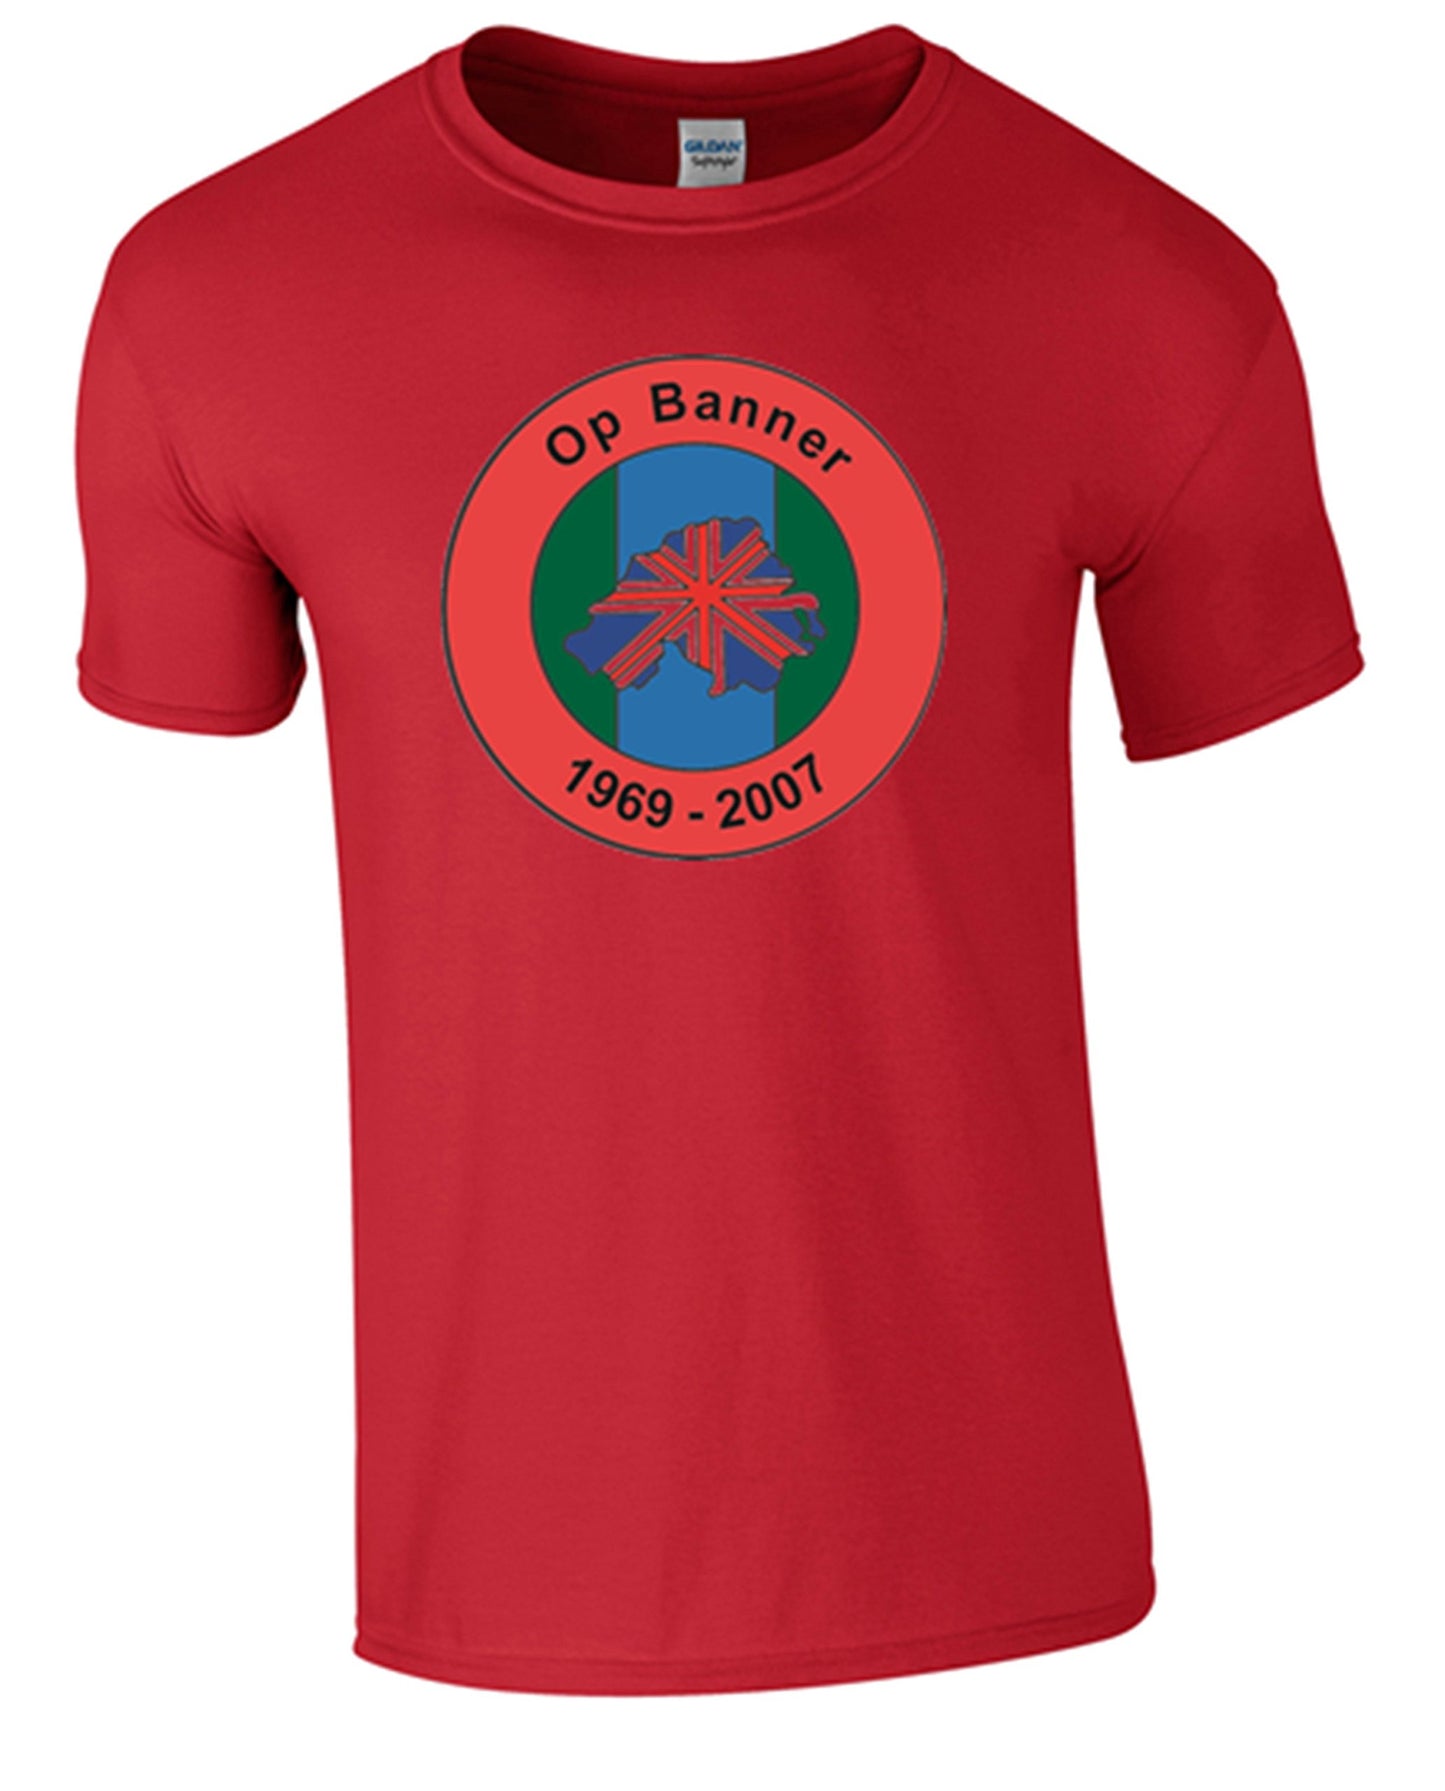 Northern Ireland Ops Banner T-Shirt (M, Red) - Army 1157 kit Army 1157 Kit